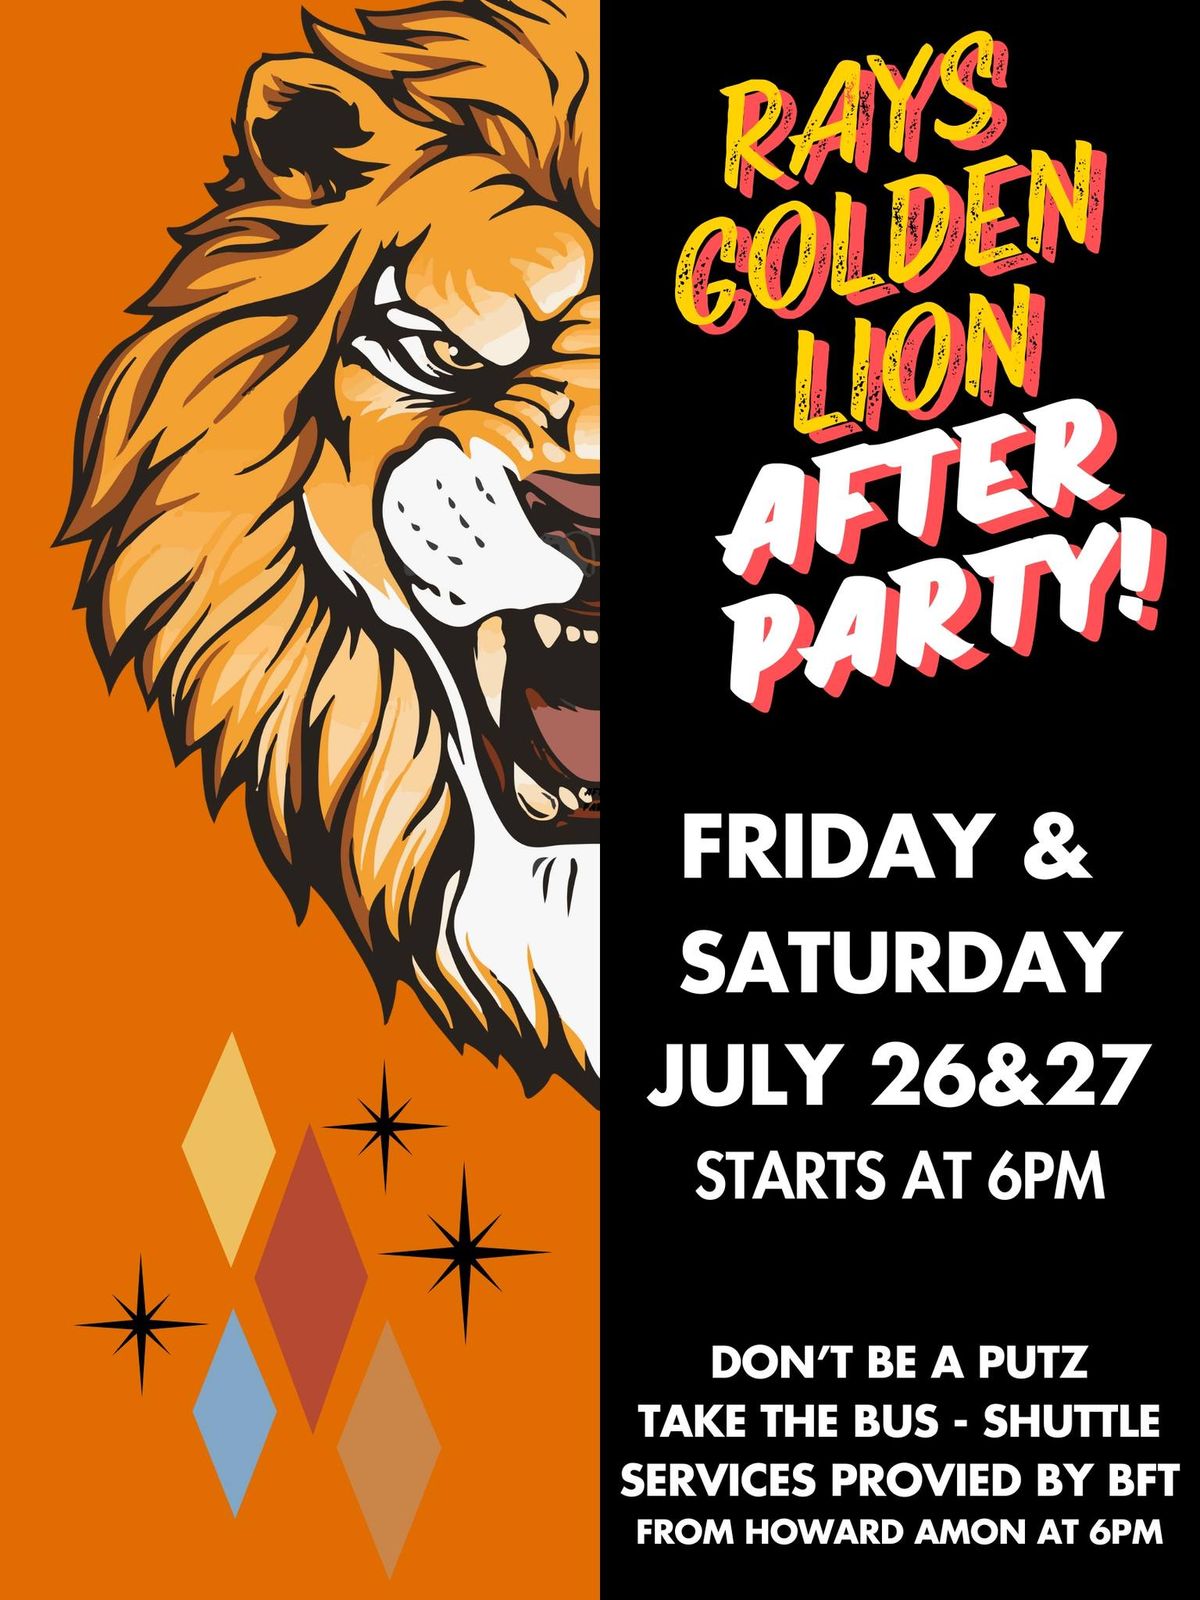 ART IN THE PARK FESTIVAL AFTERPARTY AT RAYS GOLDEN LION